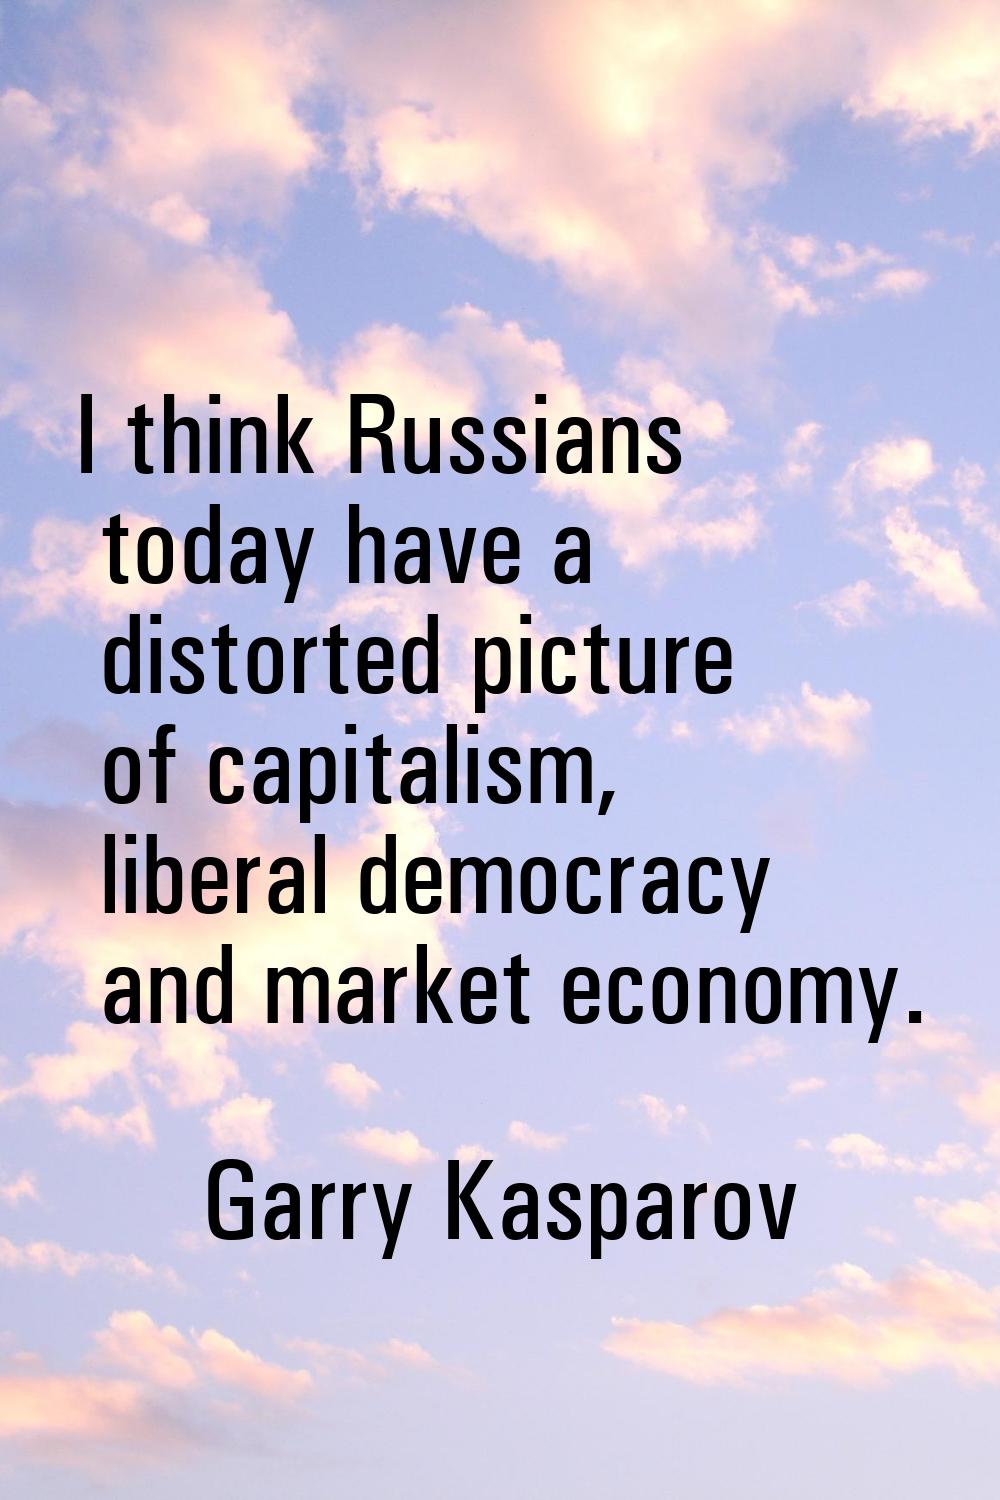 I think Russians today have a distorted picture of capitalism, liberal democracy and market economy